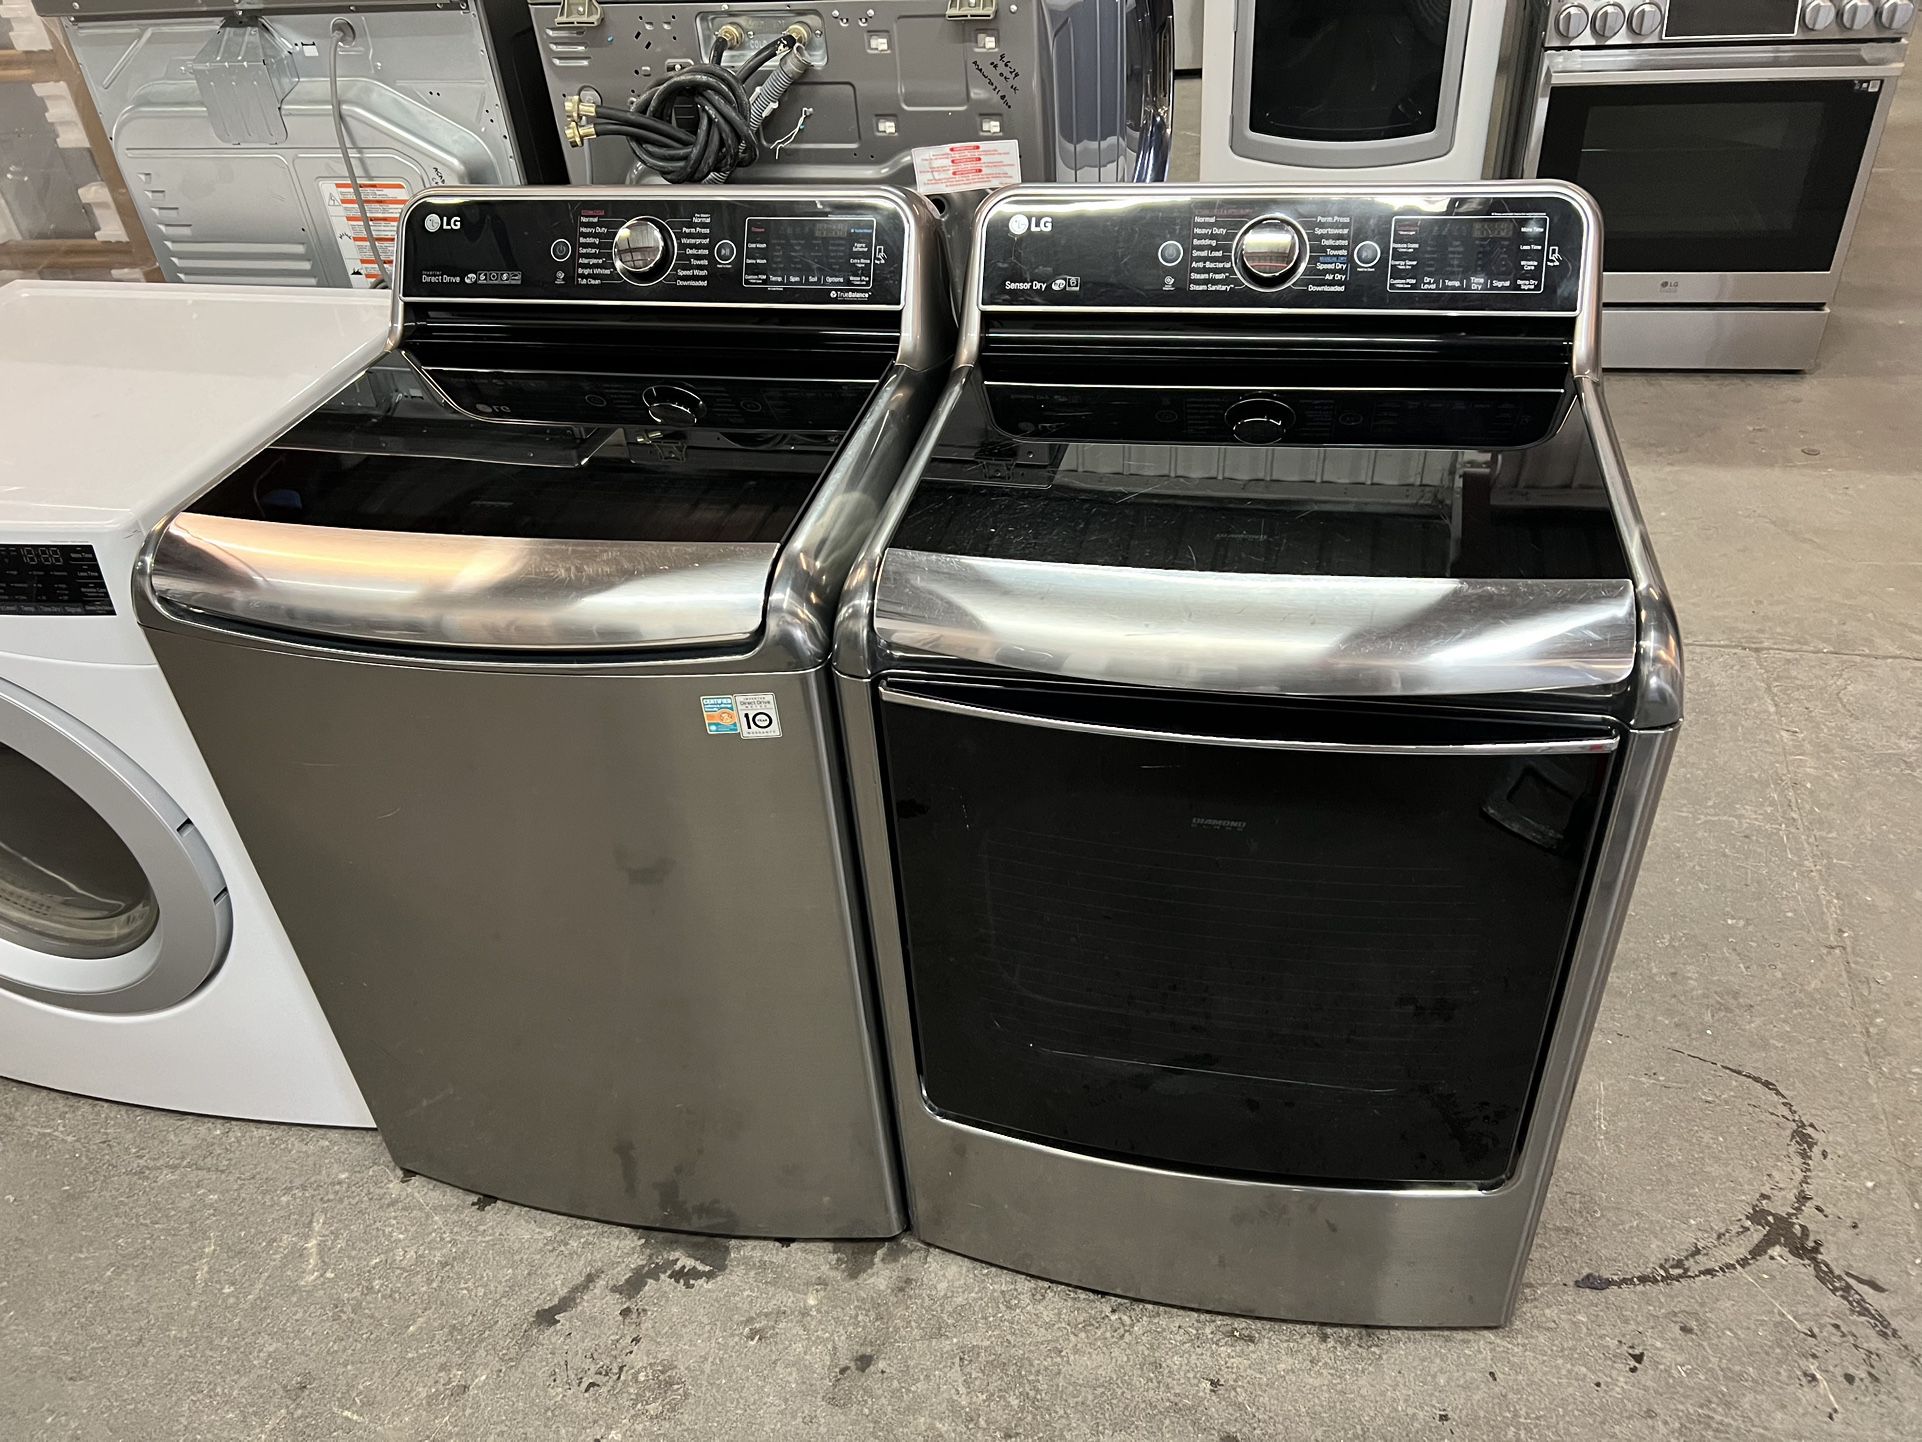 Mega capacity, graphite, steel LG laundry set with electric dryer can deliver  Retail price around $2200 WASHER= 5.7 Cu.Ft. Mega Capacity Top Load Was